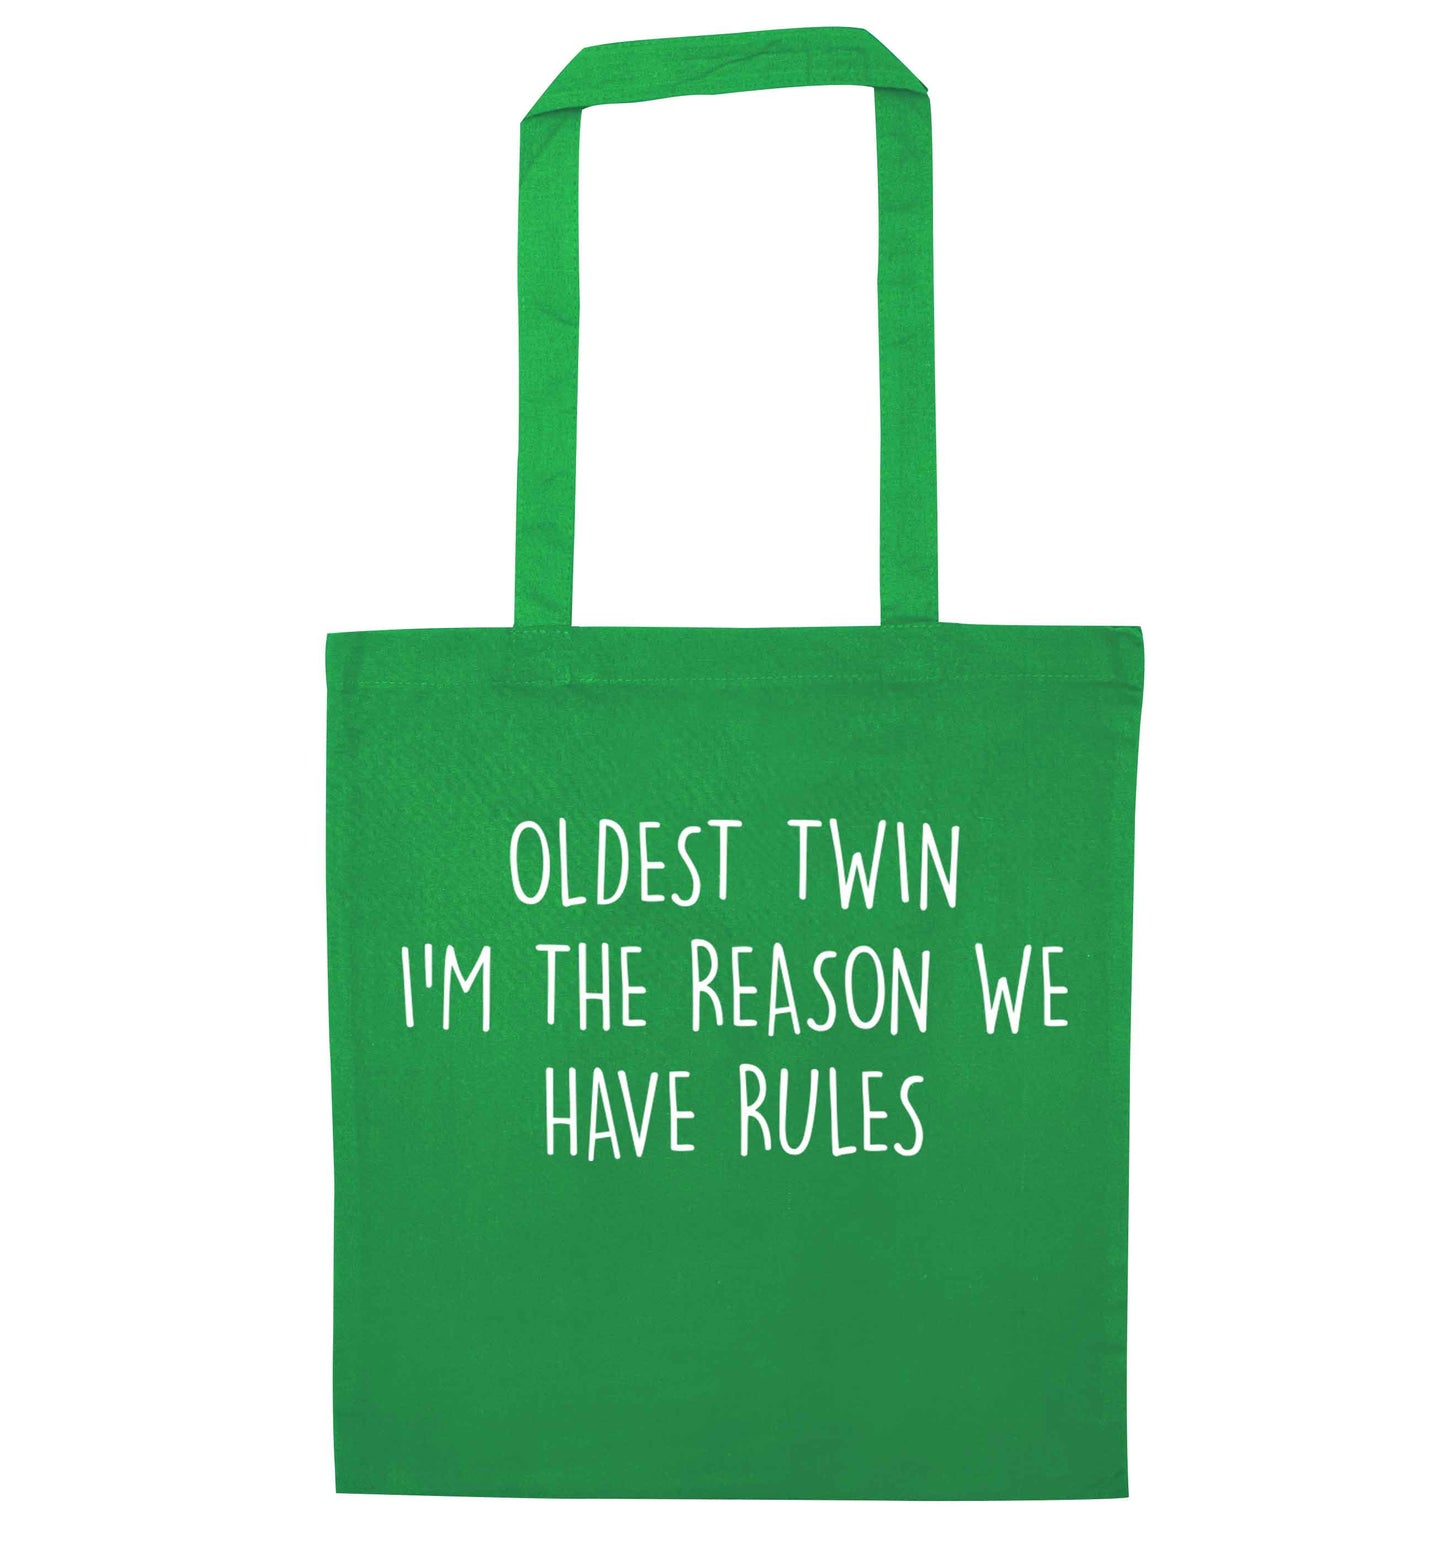 Oldest twin I'm the reason we have rules green tote bag